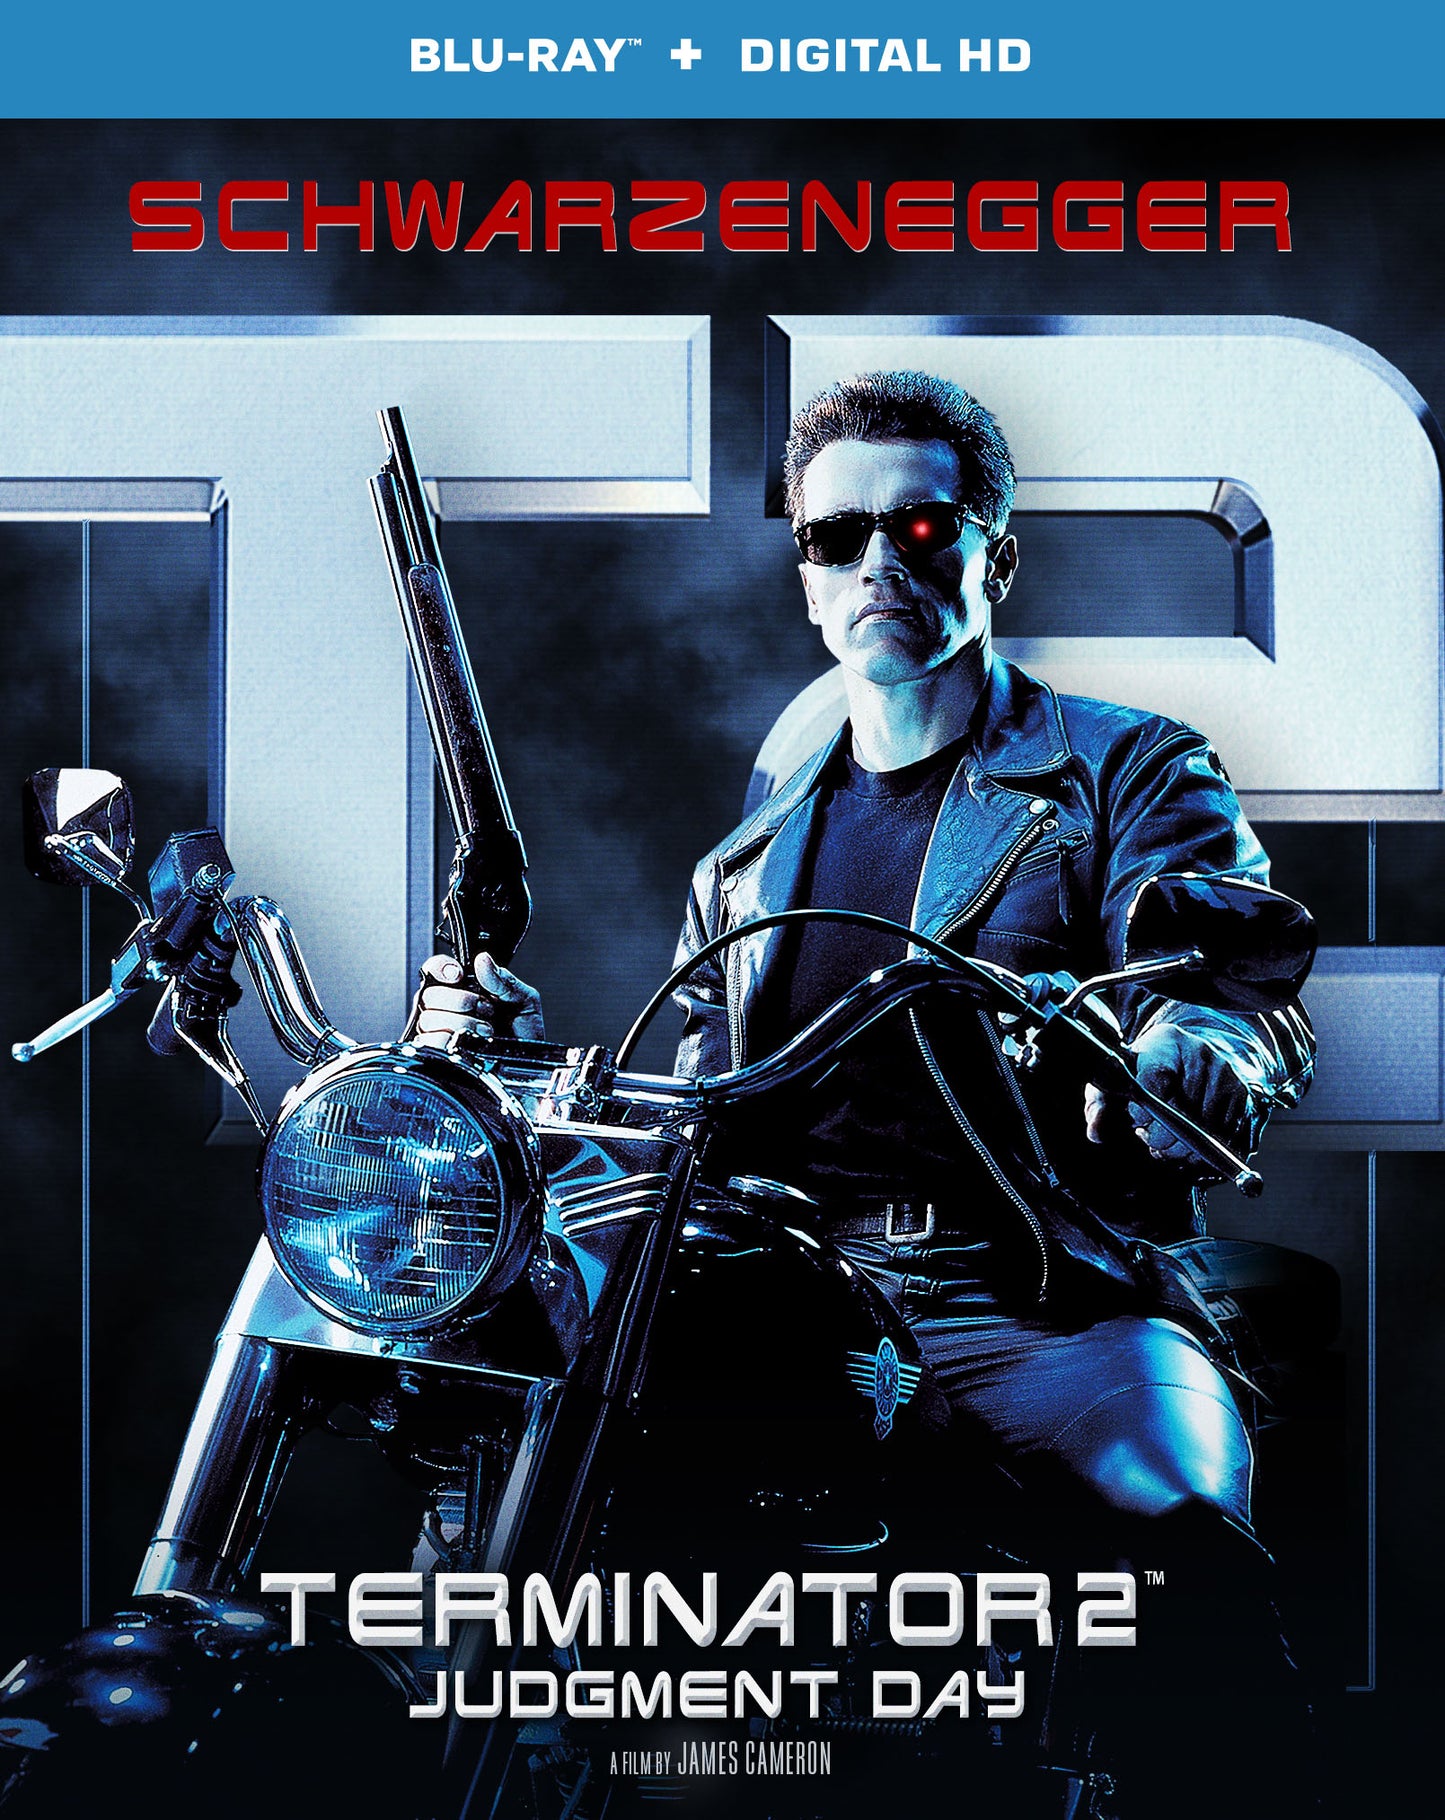 Terminator 2: Judgment Day [Blu-ray] cover art